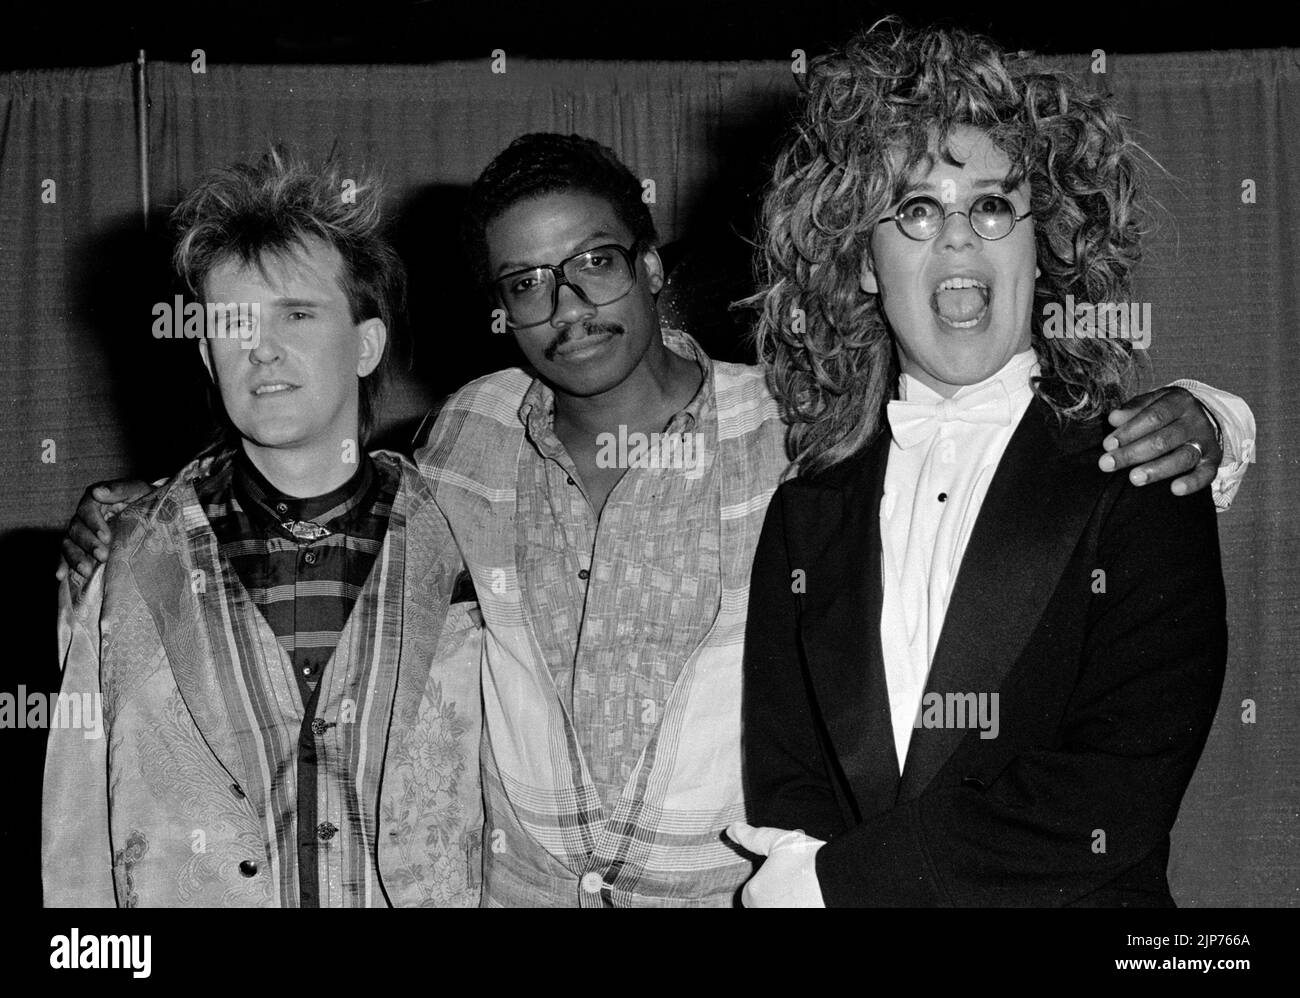 Howard Jones, Herbie Hancock and Thomas Dolby at the Grammys, 1985  Credit: Ron Wolfson / MediaPunch Stock Photo